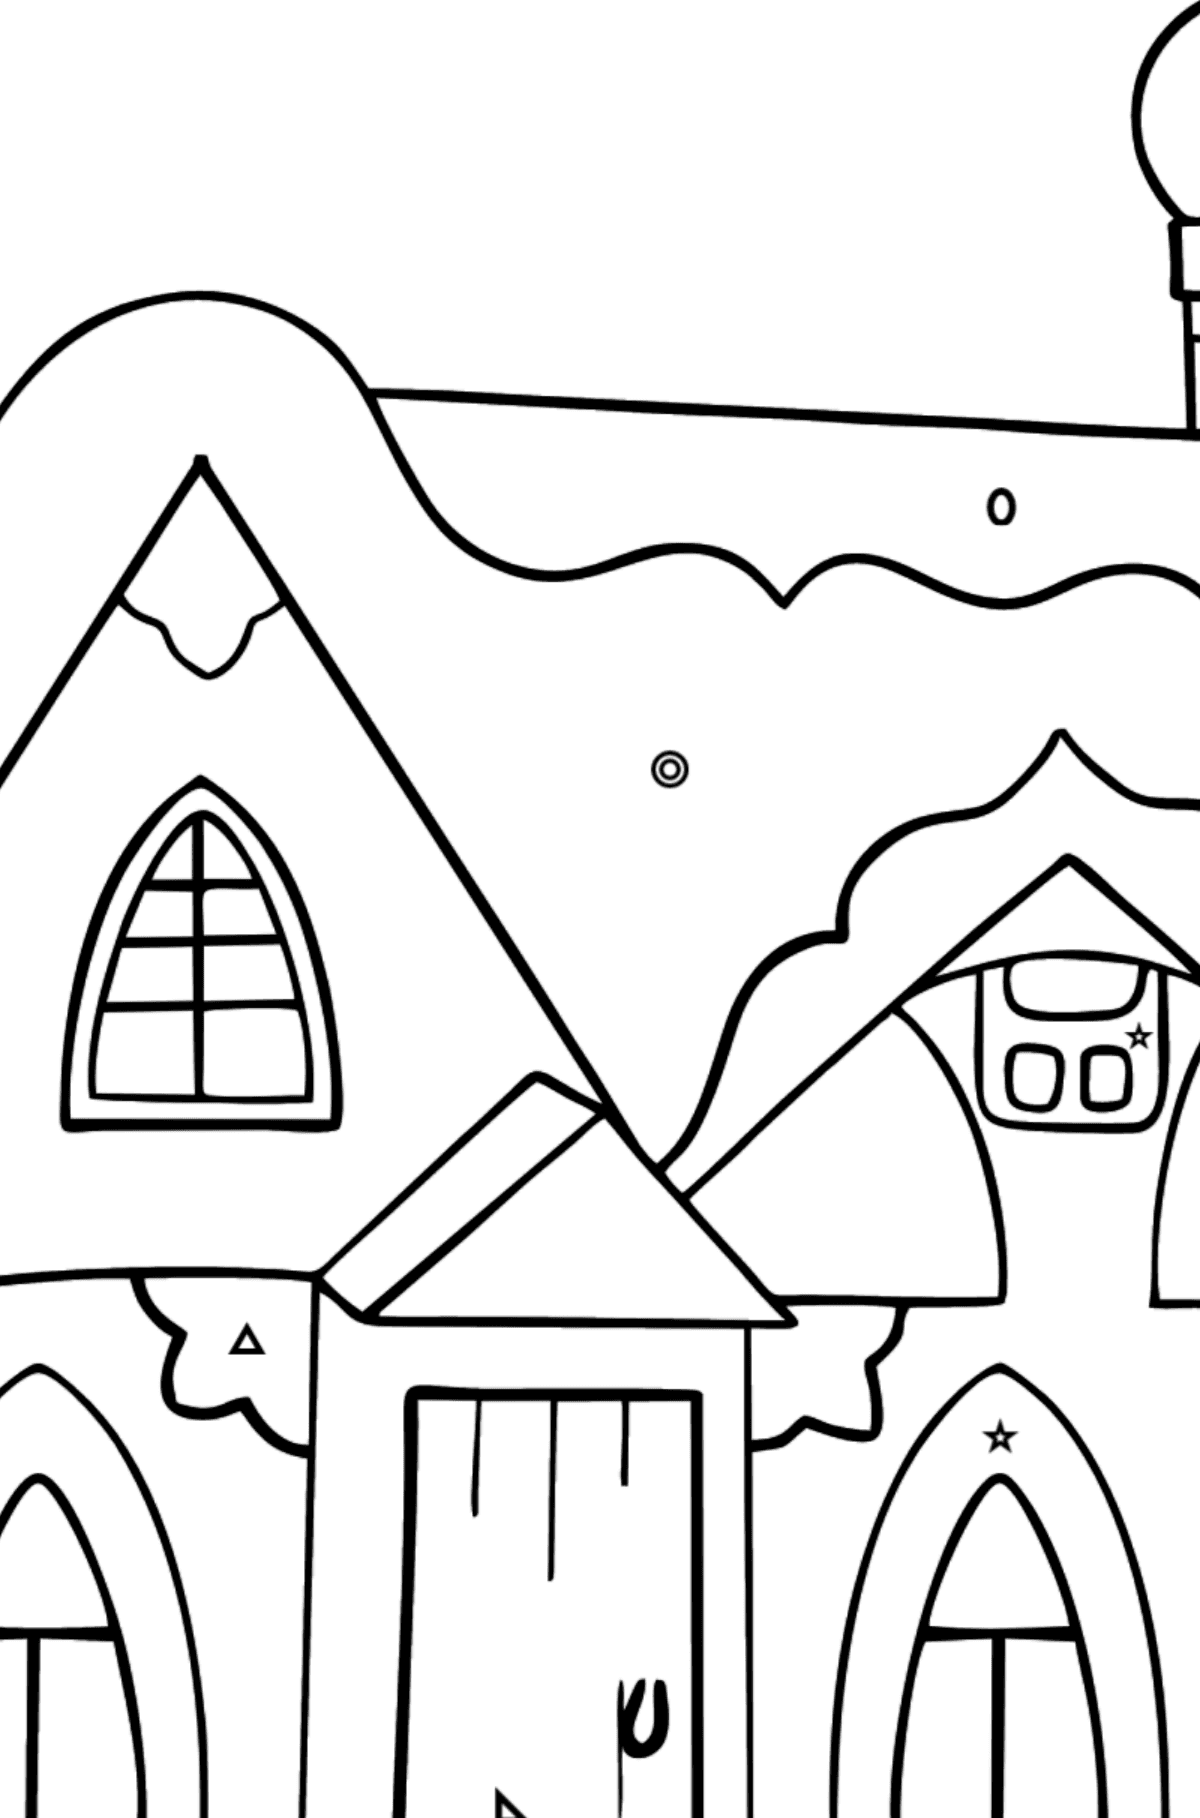 Simple Coloring Page - A Fairytale House - Coloring by Geometric Shapes for Kids